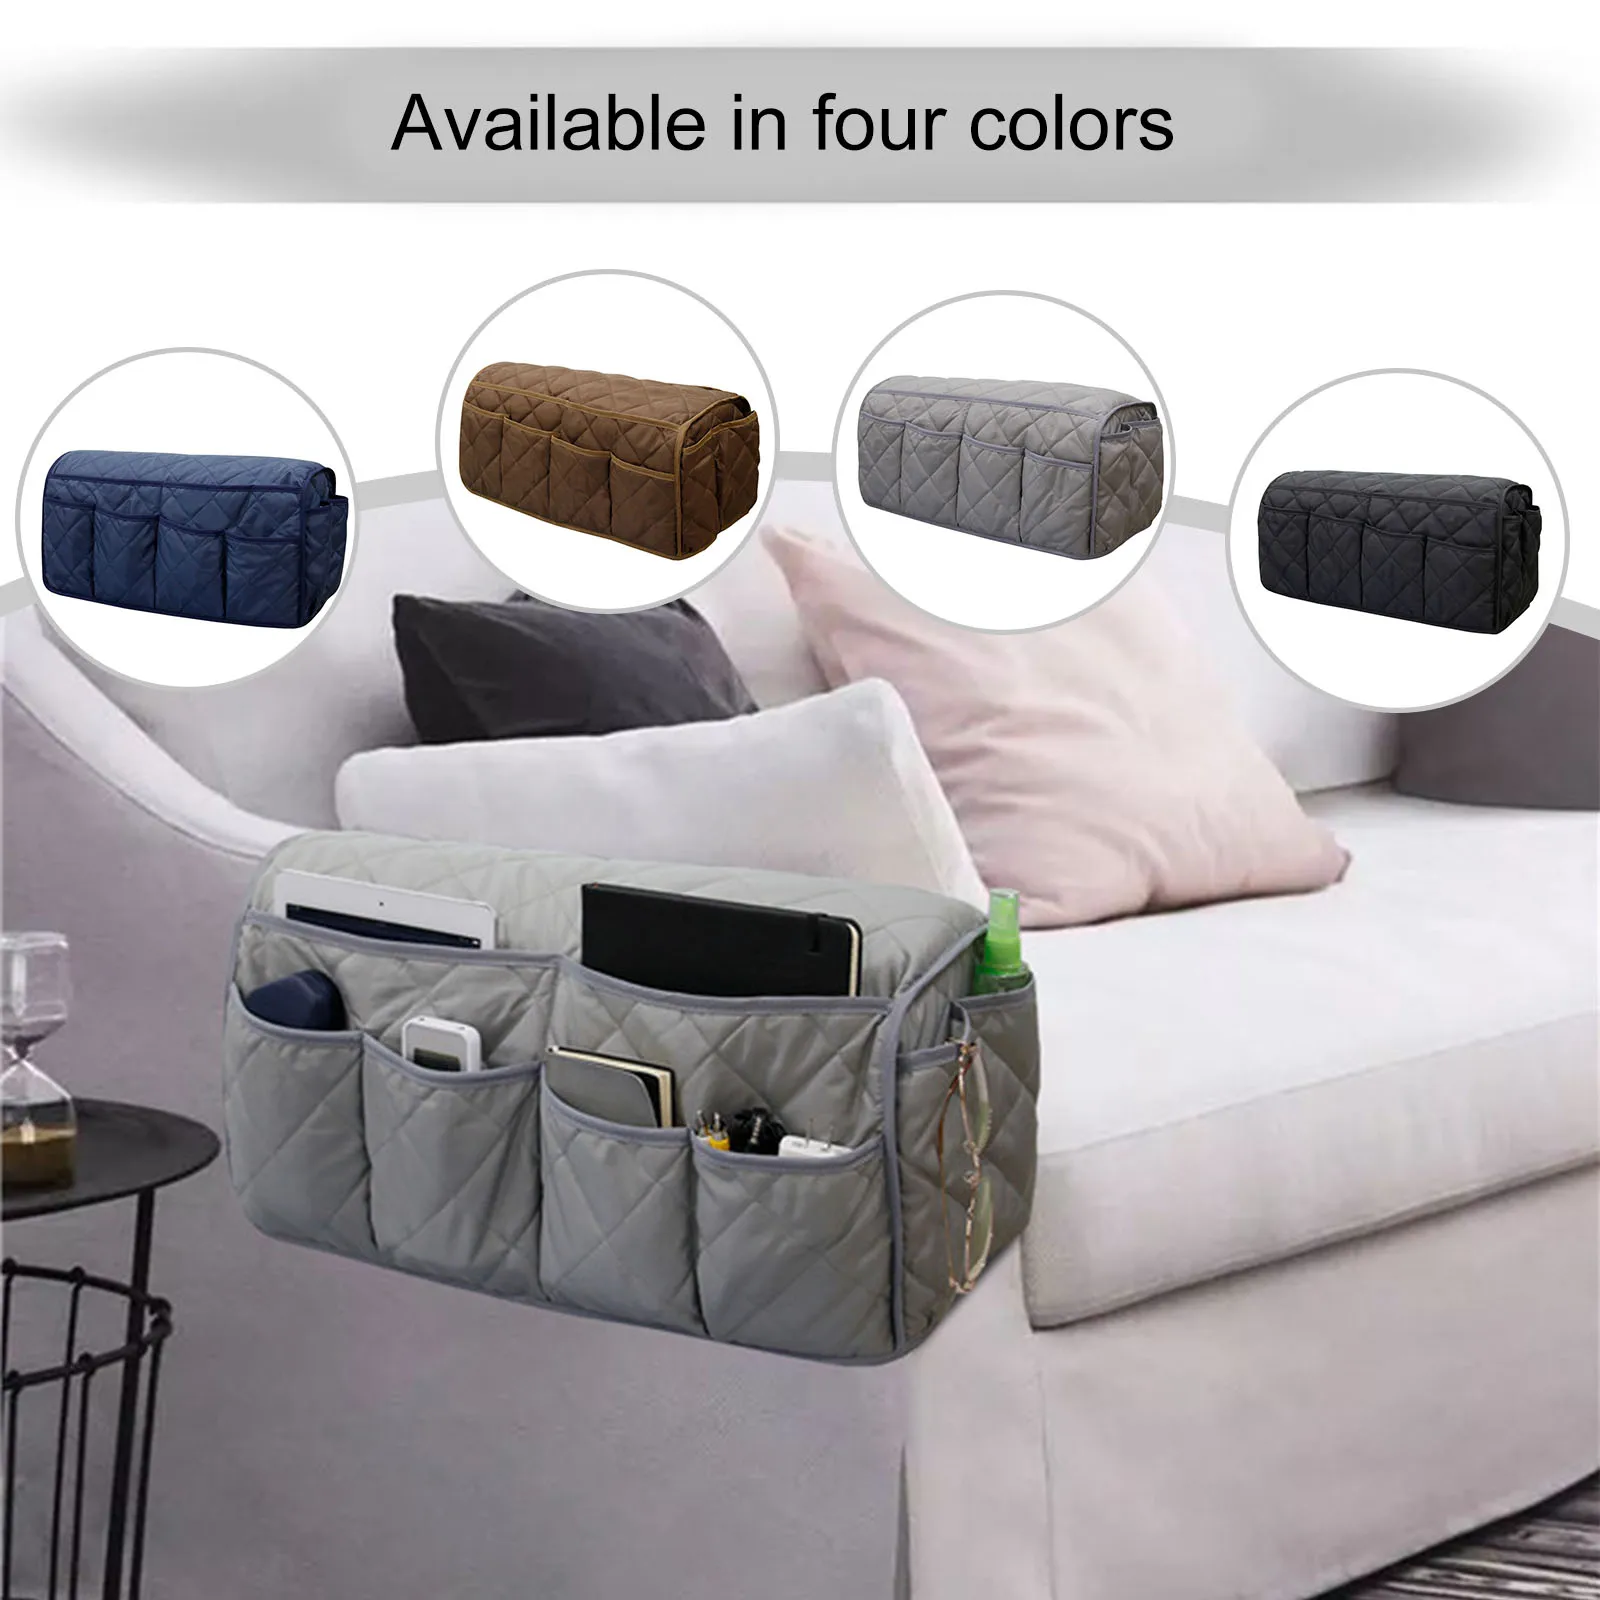 WORMENG Storage,Anti-slip Sofa Couch Chair Recliner Armrest Soft Caddy Organizer Holder For Home,Kitchen,Bathroom,Bedroom 